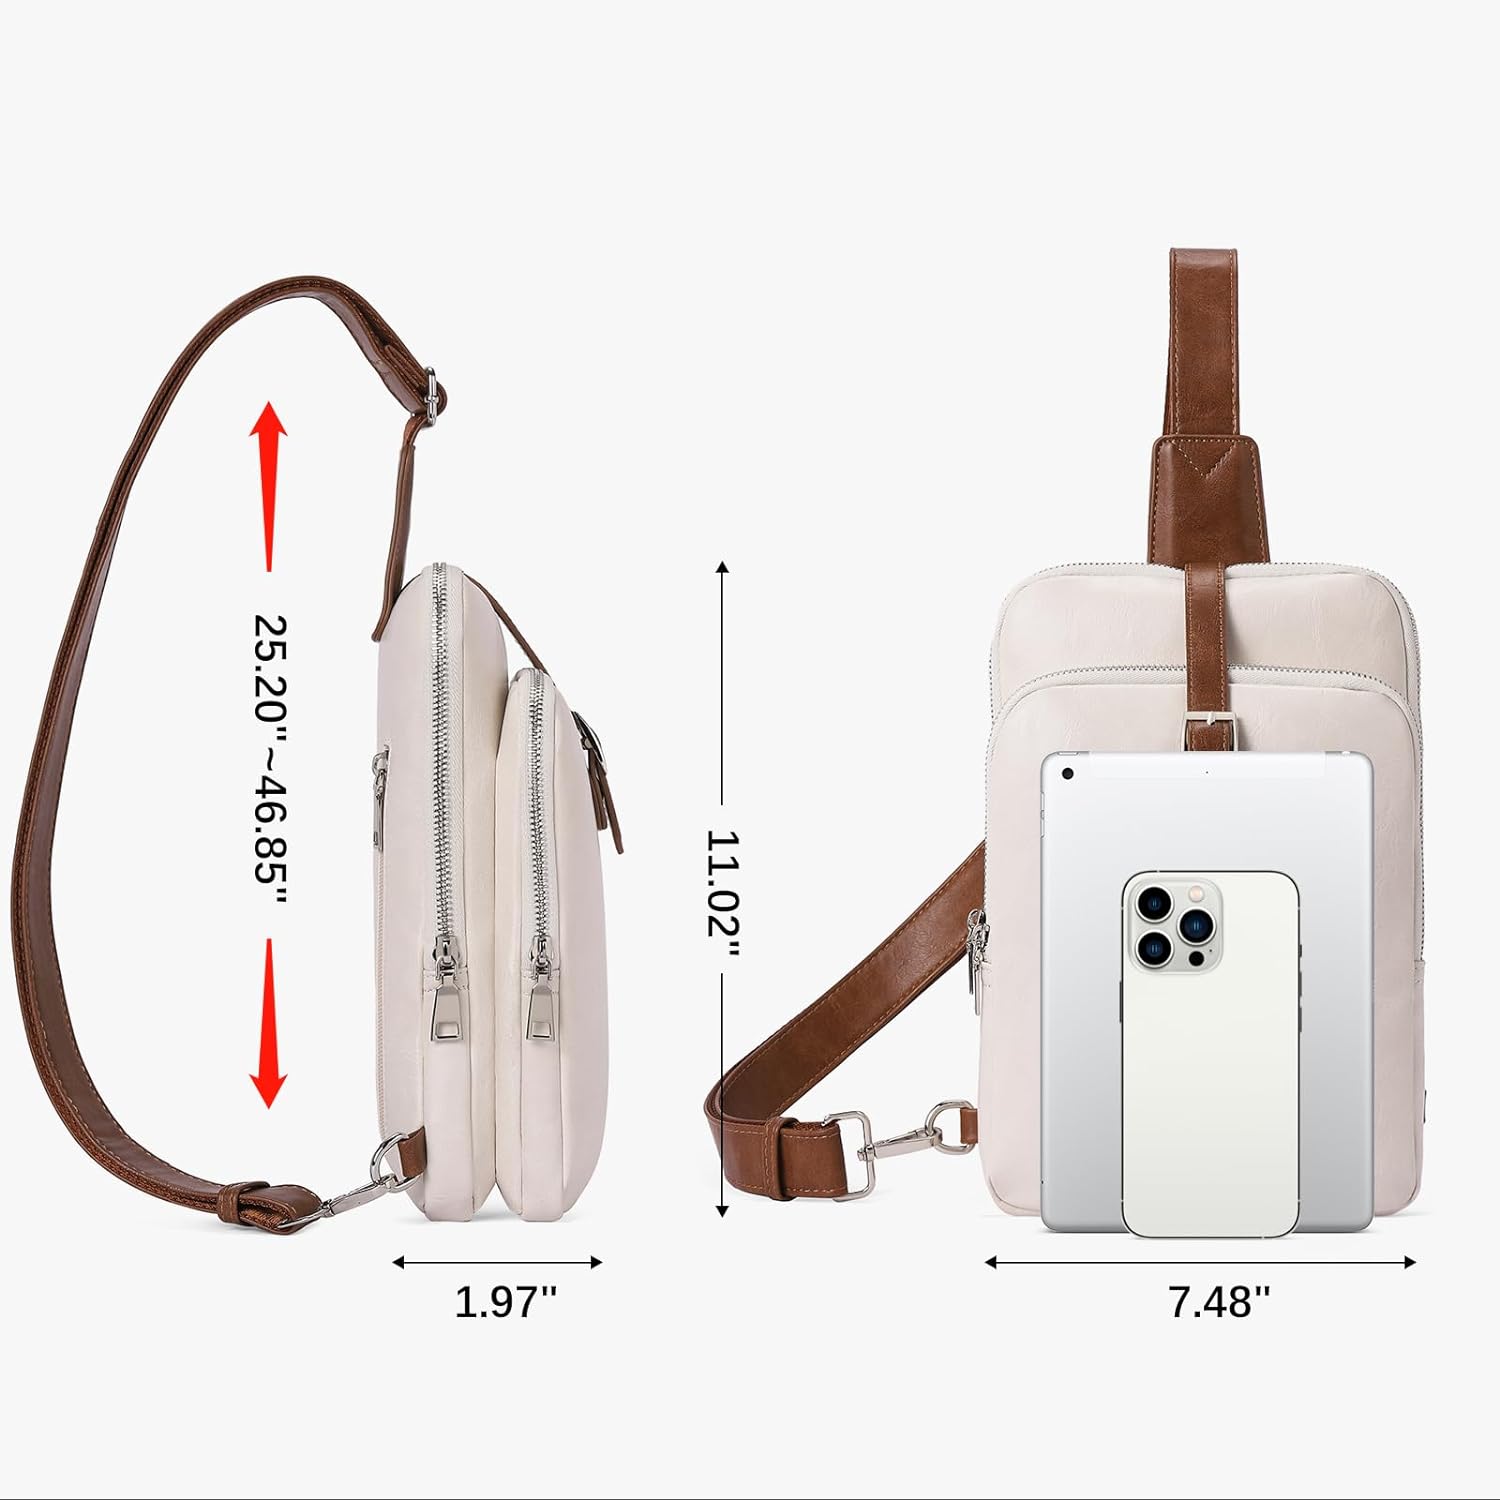 WESTBRONCO Crossbody Sling Bags for Women Men, High-capacity PU Leather Fashion Medium Fanny Bags Adjustable Strap for Gifts